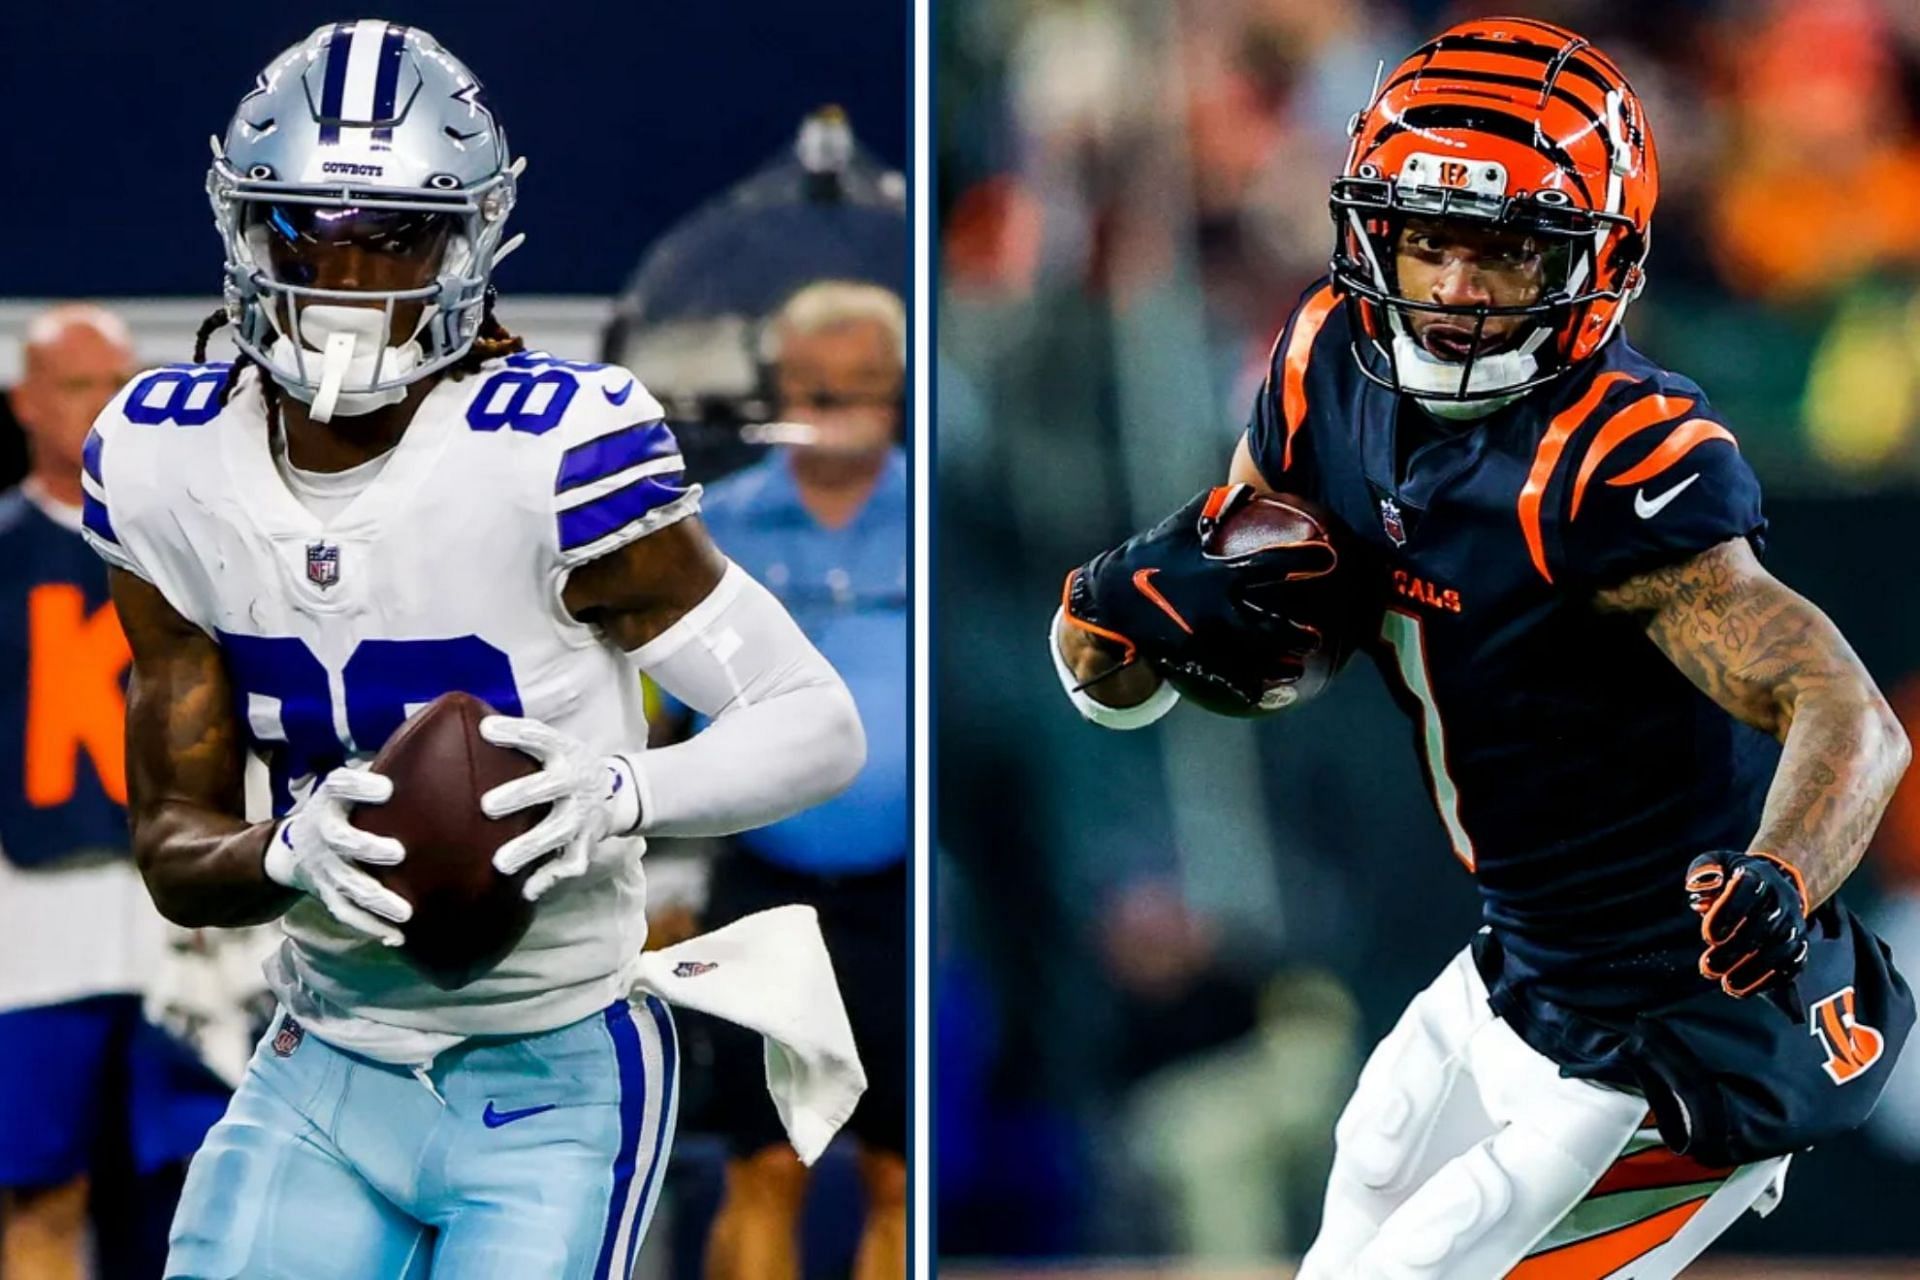 Bengals Game Tonight: Bengals vs. Jaguars injury report, schedule, live  stream, TV channel and betting preview for Week 4 NFL game